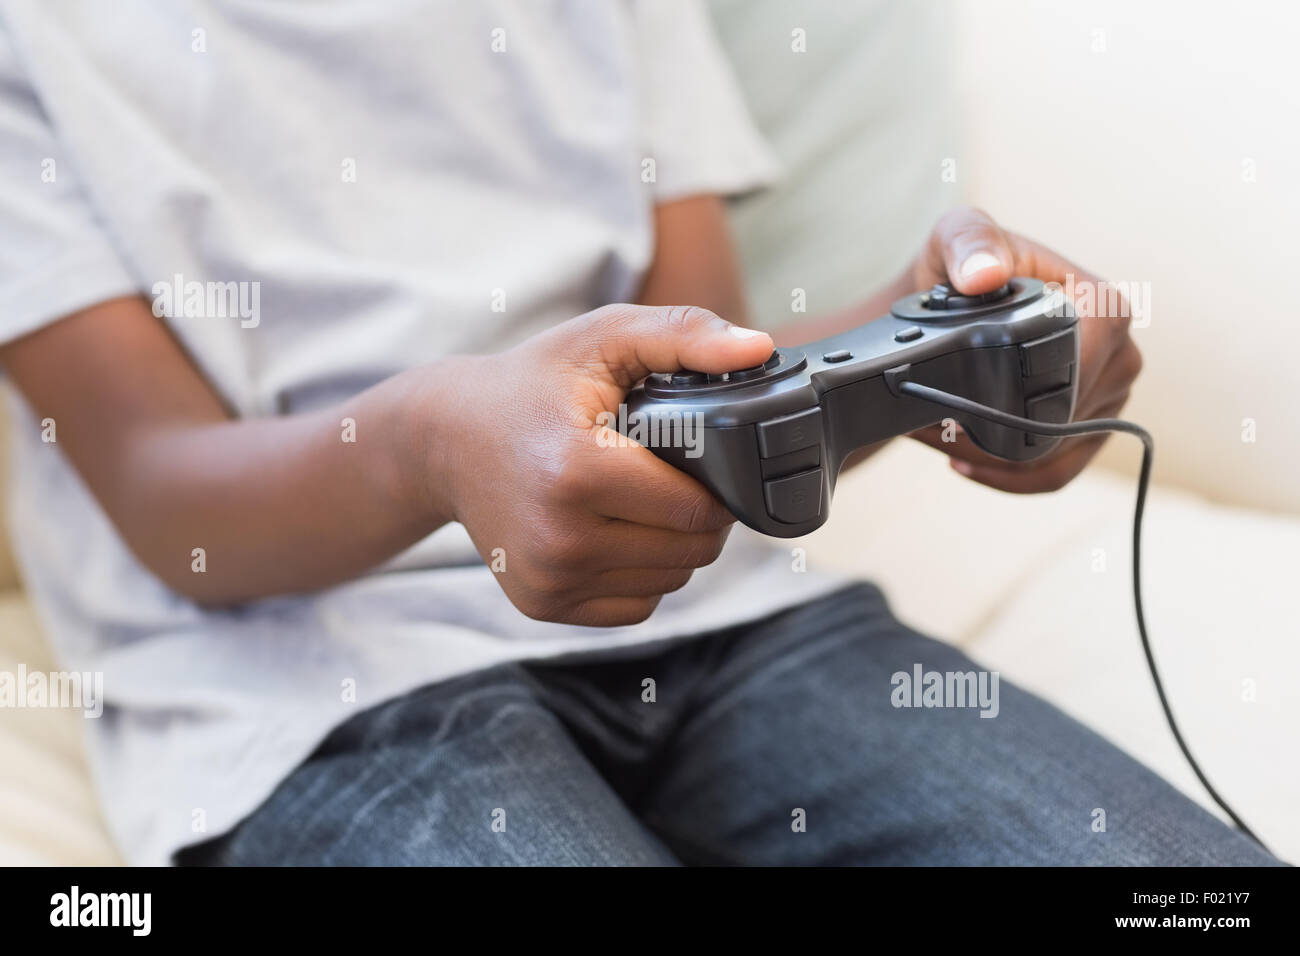 Little boy playing video games Stock Photo